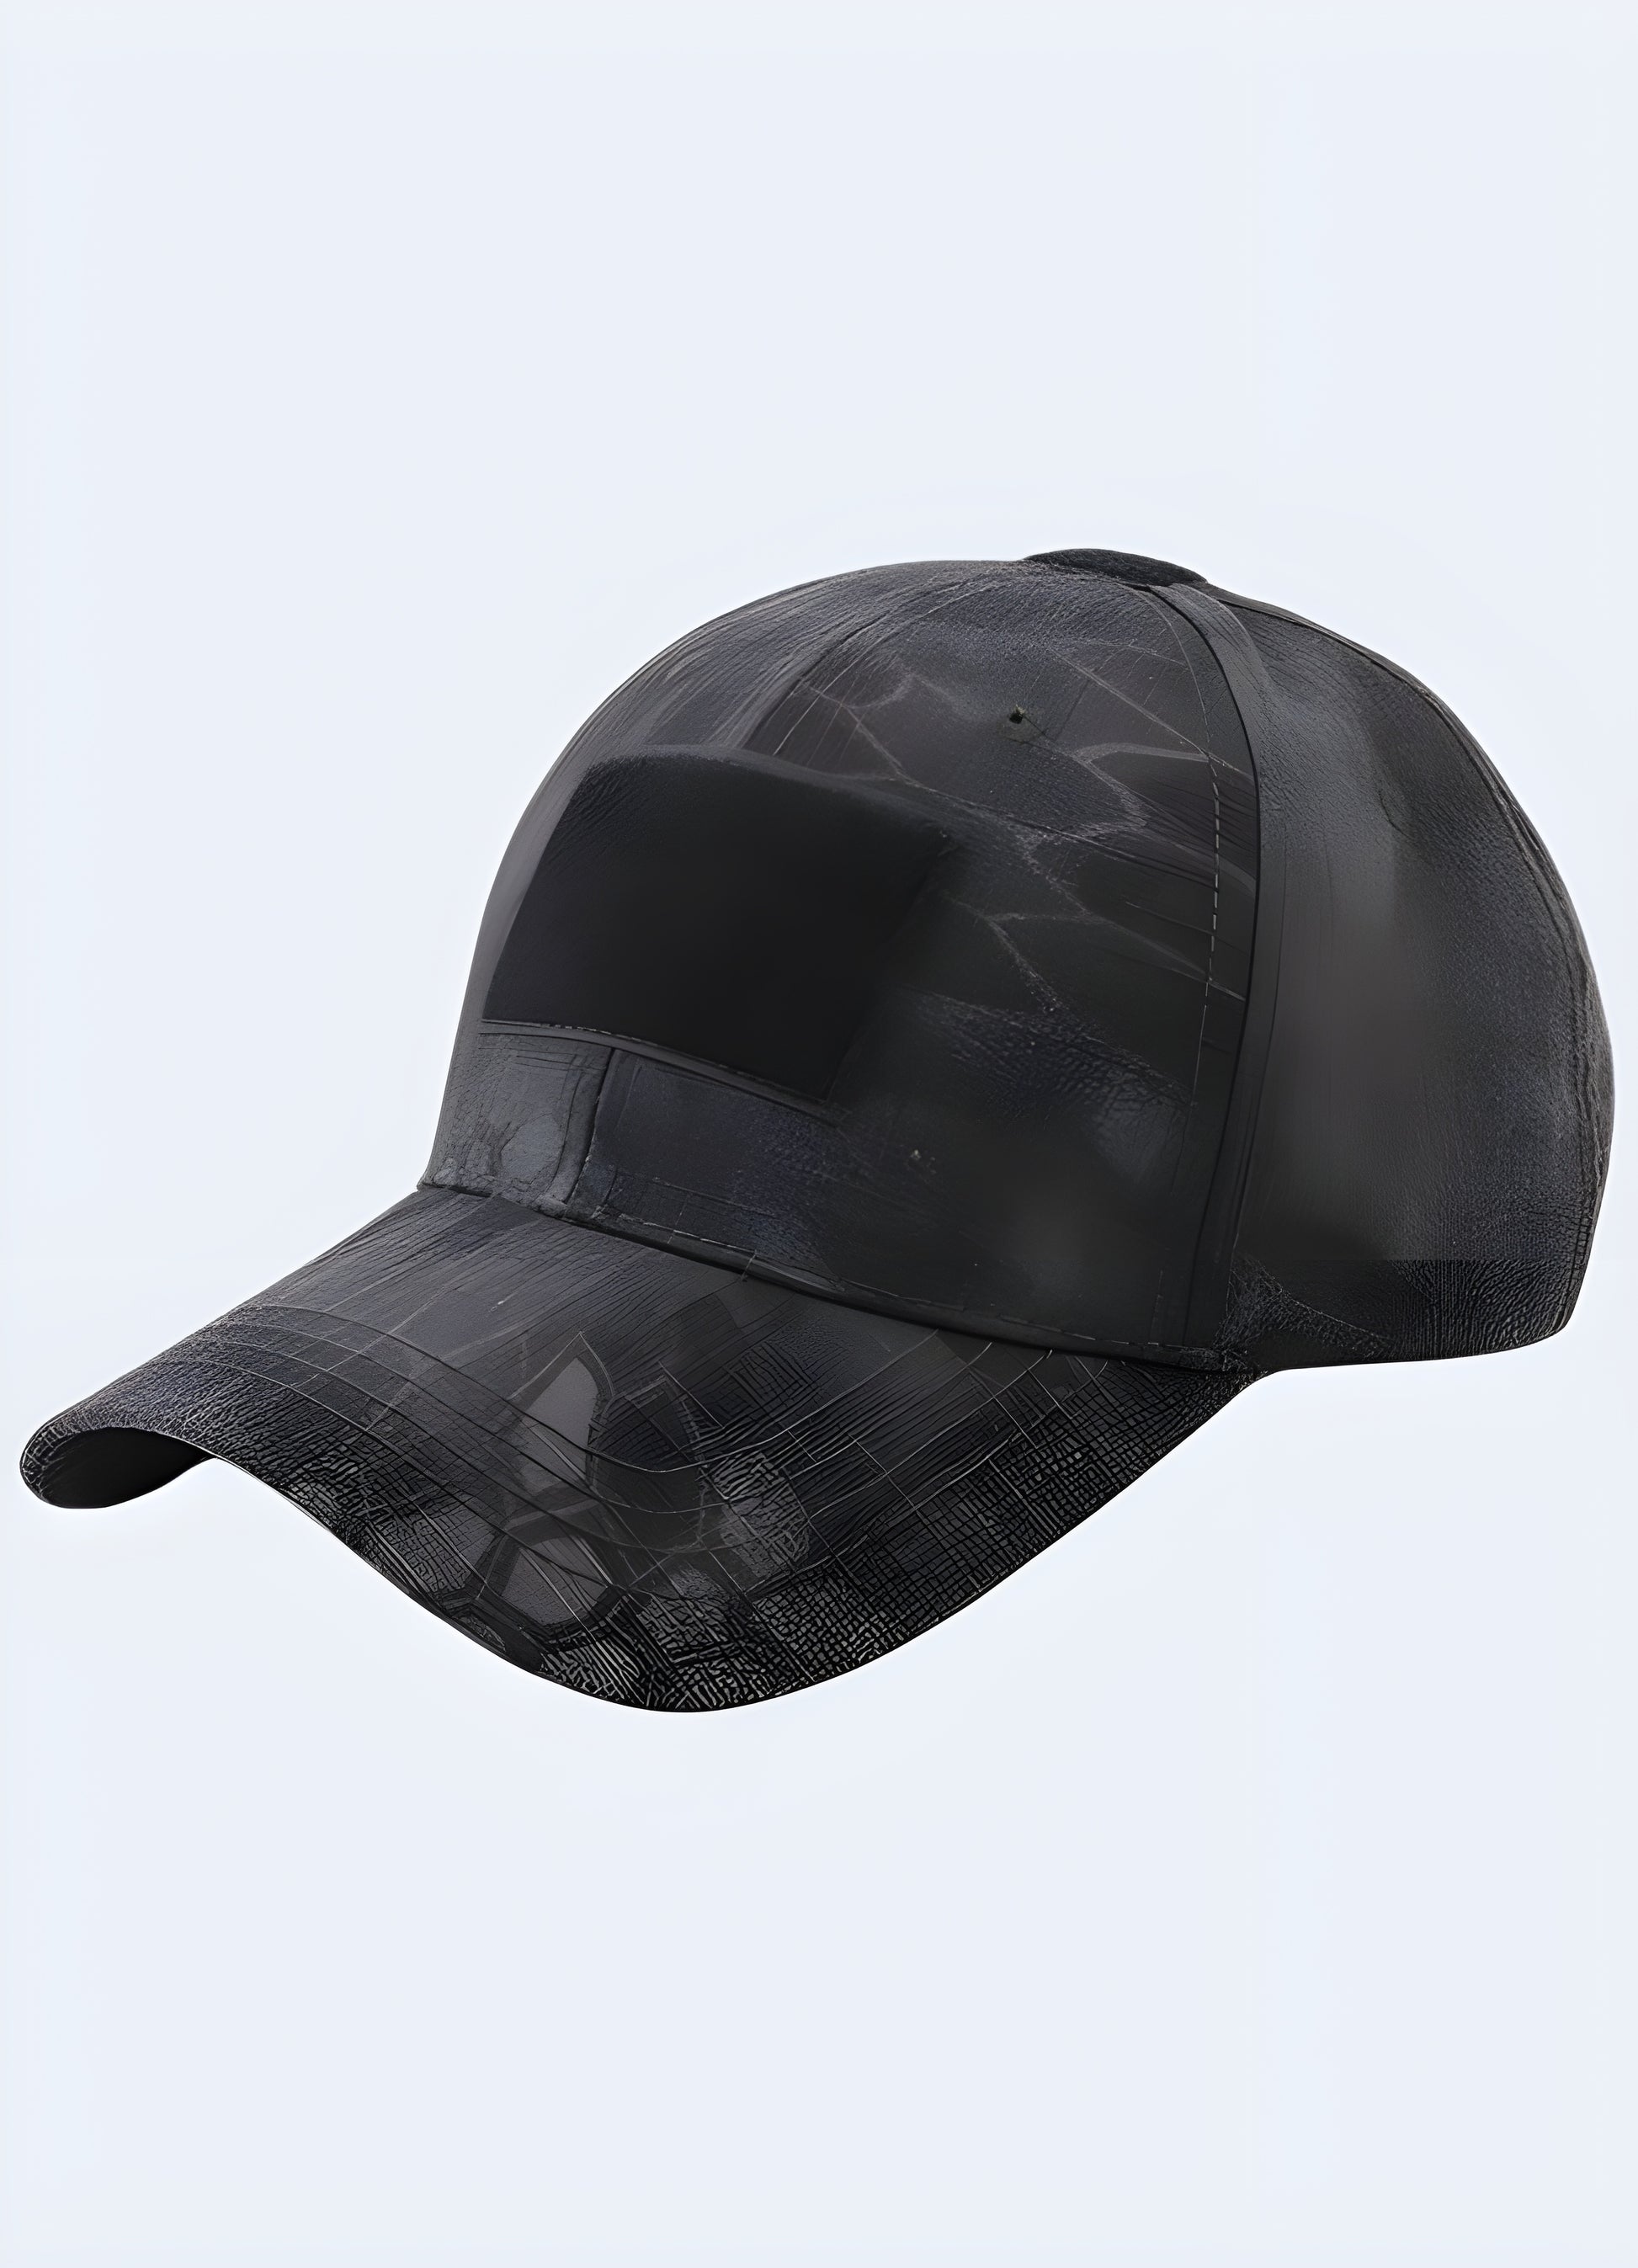 Conquer any adventure with the black tactical cap.